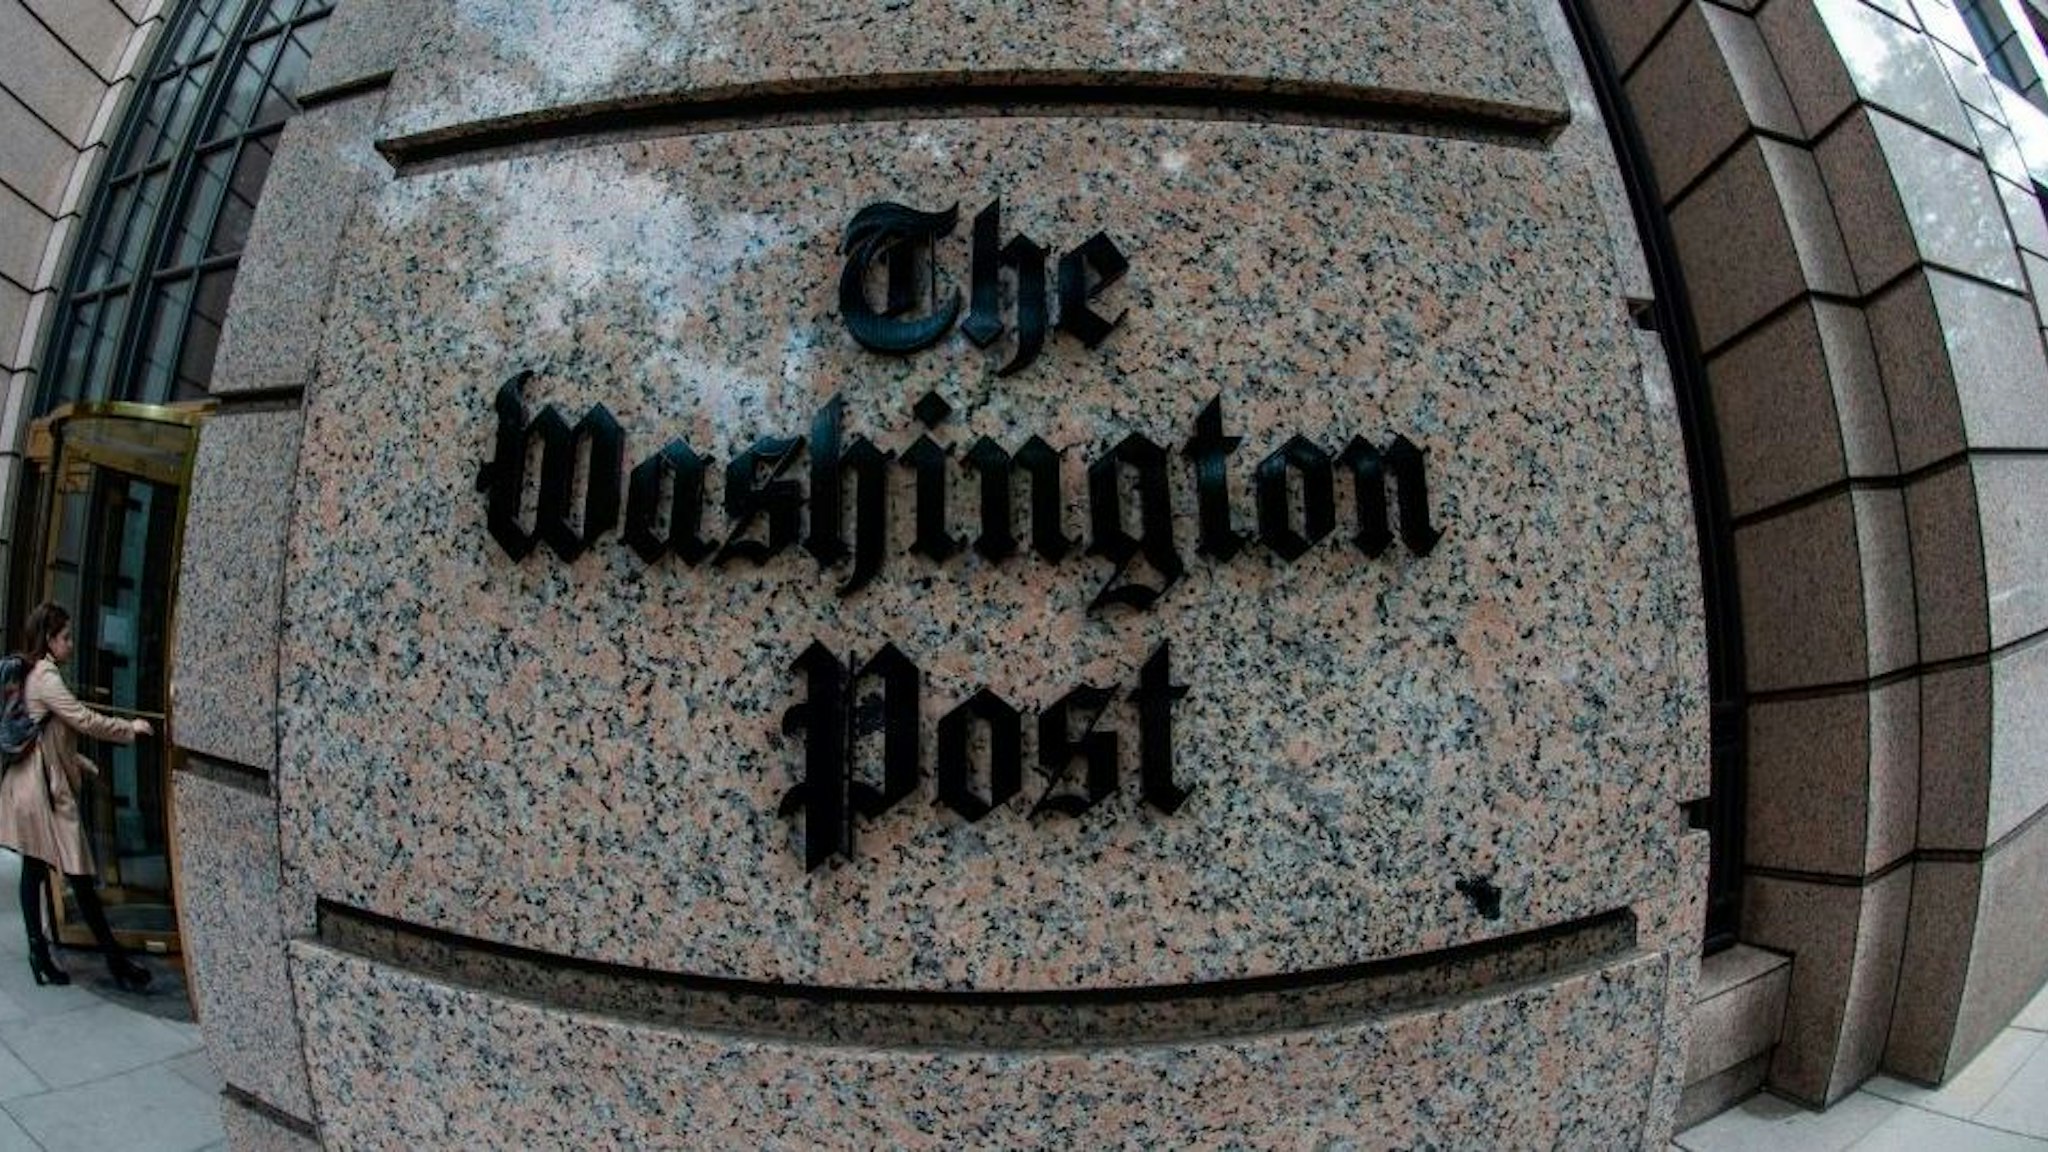 The building of the Washington Post newspaper headquarter is seen on K Street in Washington DC on May 16, 2019. - The Washington Post is a major American daily newspaper published in Washington, D.C., with a particular emphasis on national politics and the federal government. It has the largest circulation in the Washington metropolitan area. (Photo by Eric BARADAT / AFP)